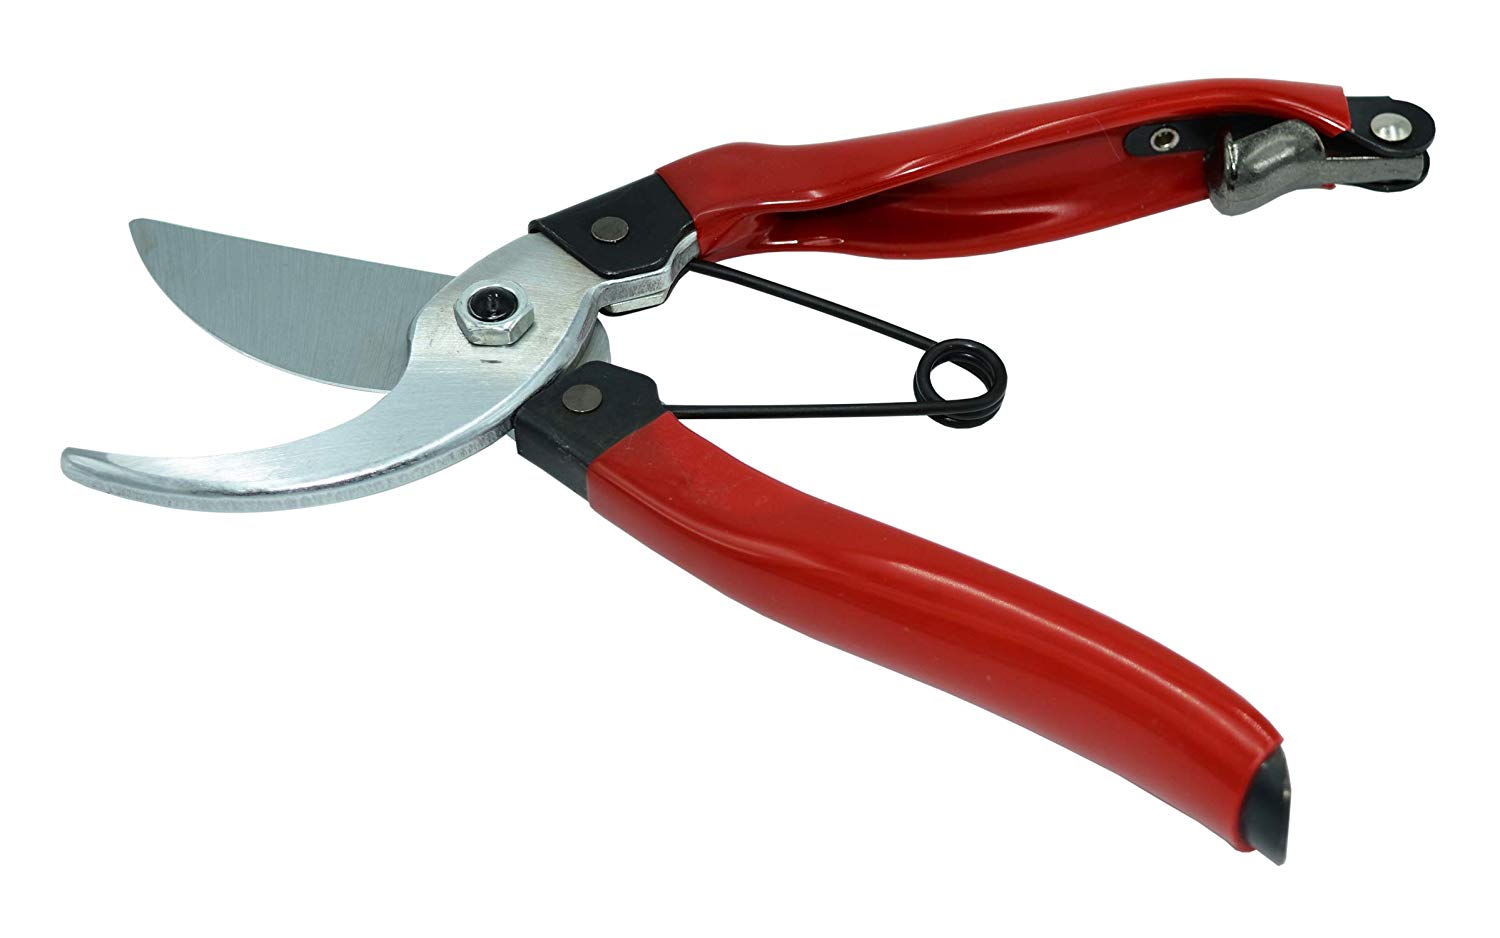 Zenport Z930 Pruner SK5 Japanese Steel, 1-Inch Cut, 8-Inch Long, Red Handle - Click Image to Close